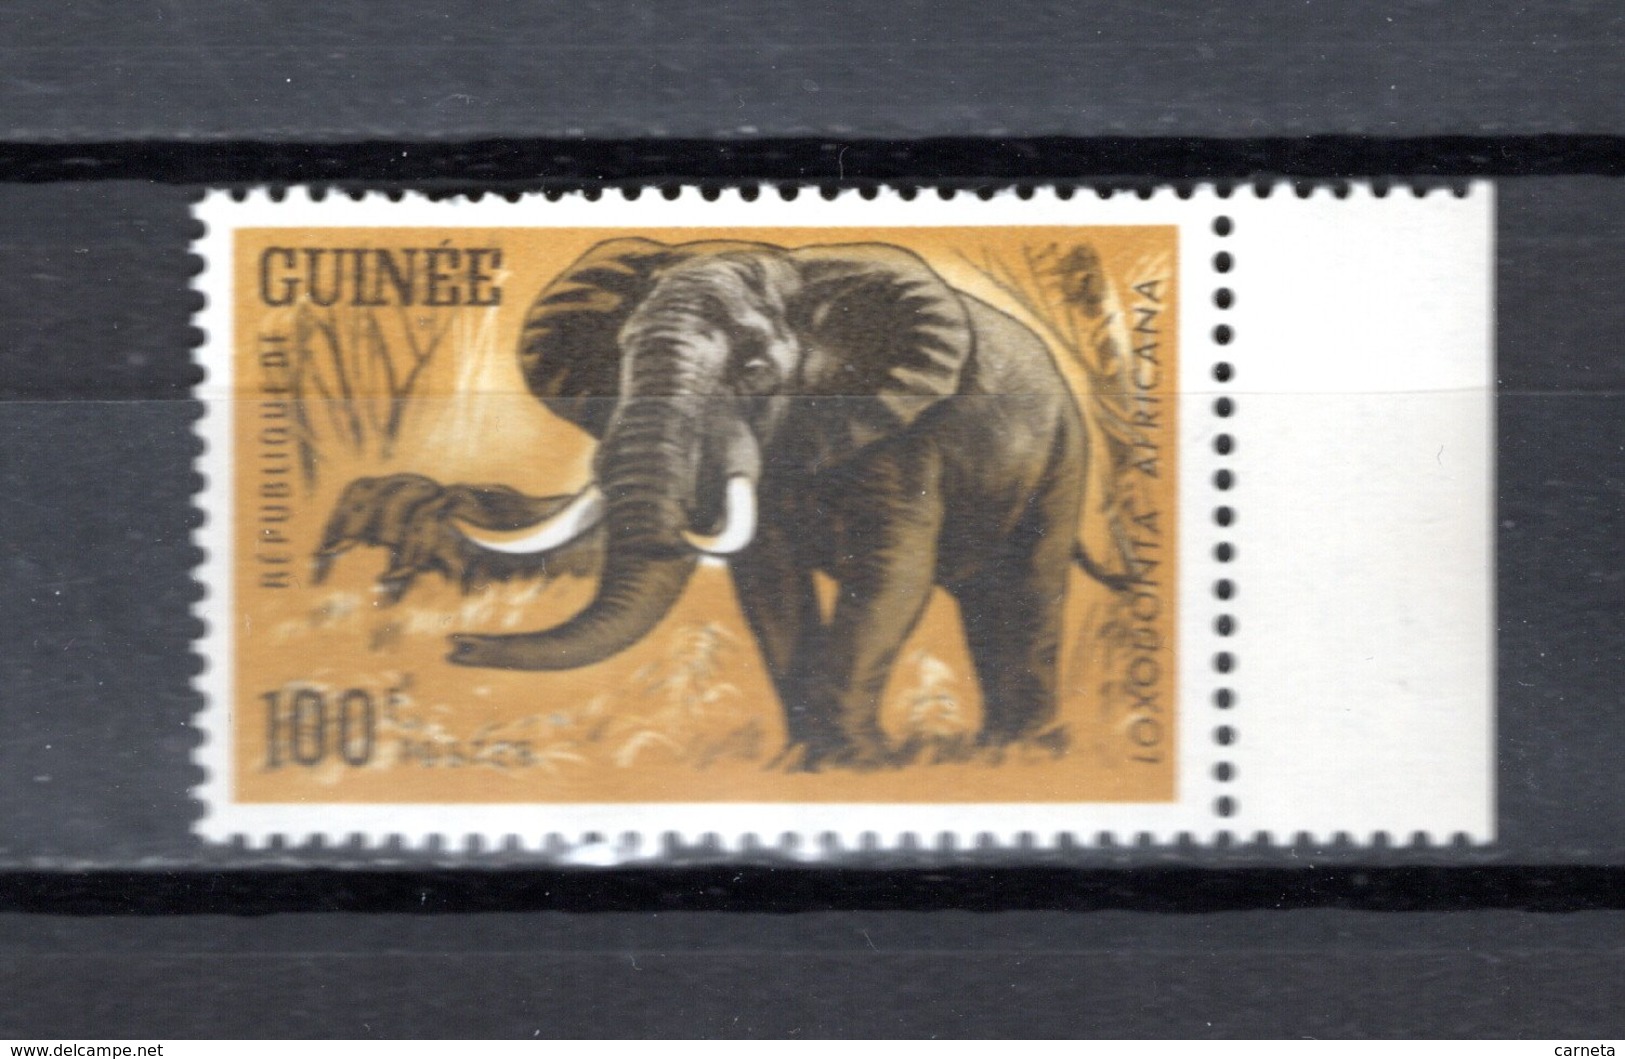 GUINEE N° 206  NEUF SANS CHARNIERE COTE 3.00€  ANIMAUX ELEPHANT - Guinee (1958-...)